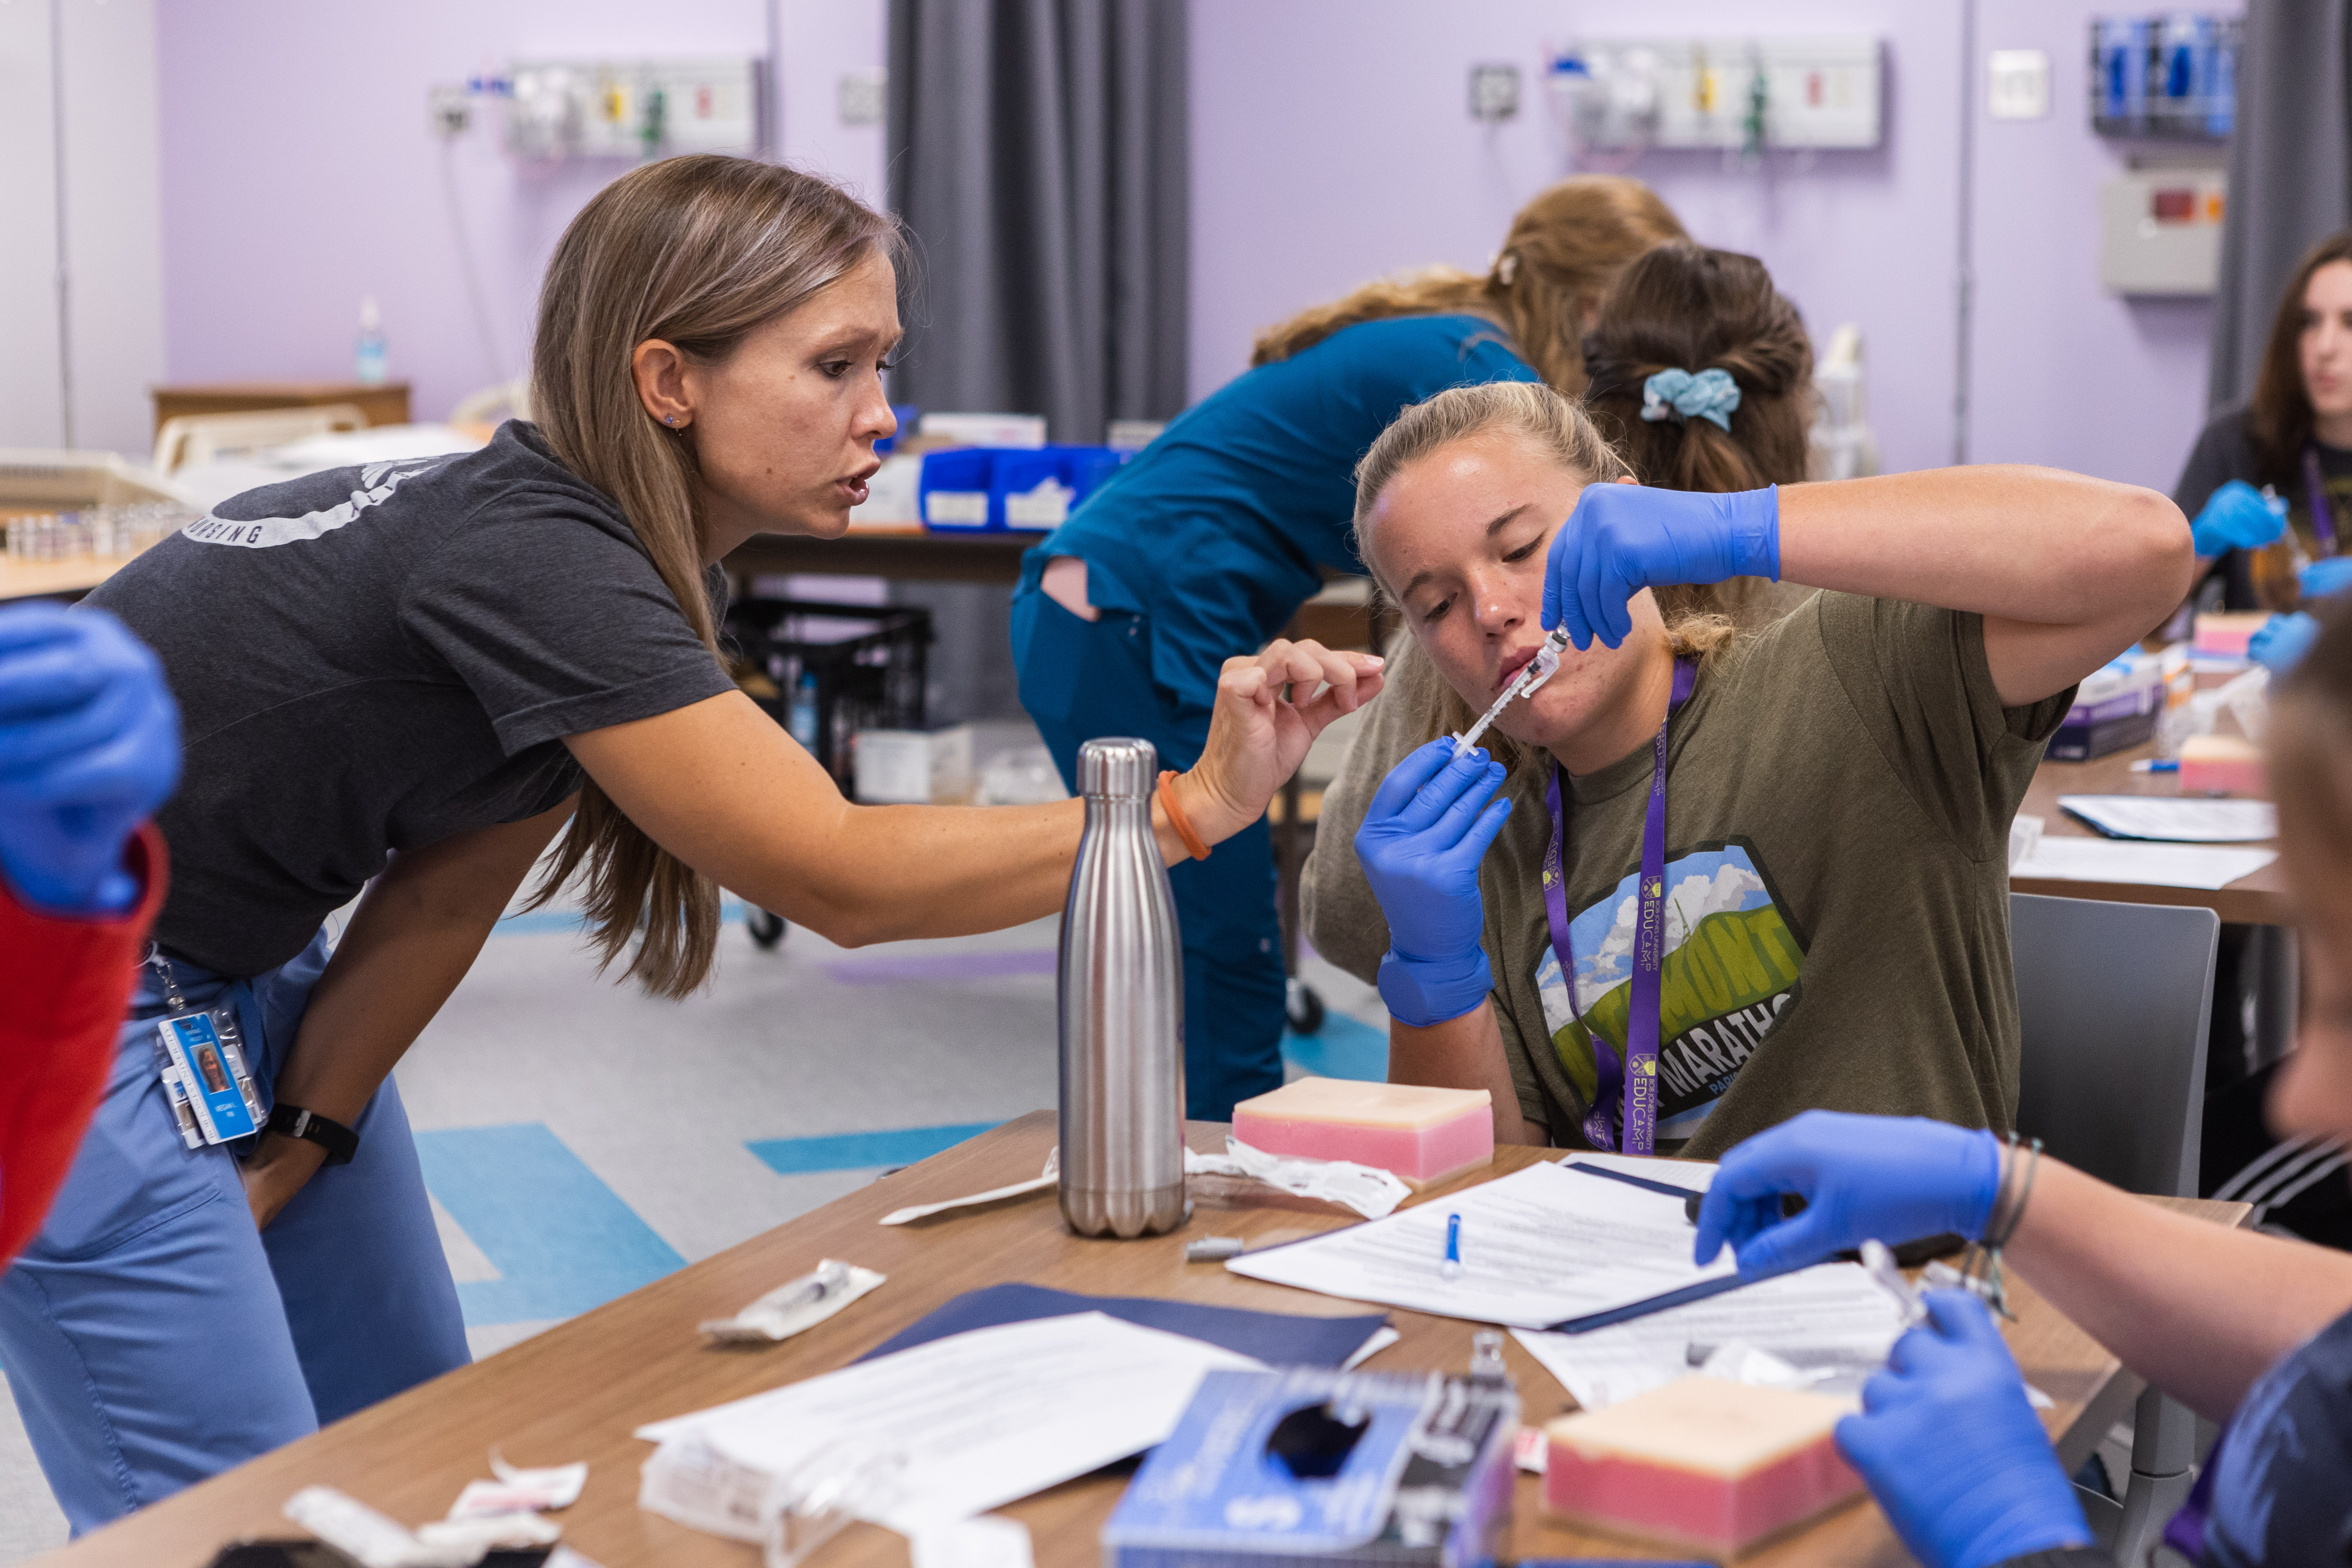 Campers attending the nursing EDUcamp learn how to administer shots from Division of Nursing chair Megan Lanpher